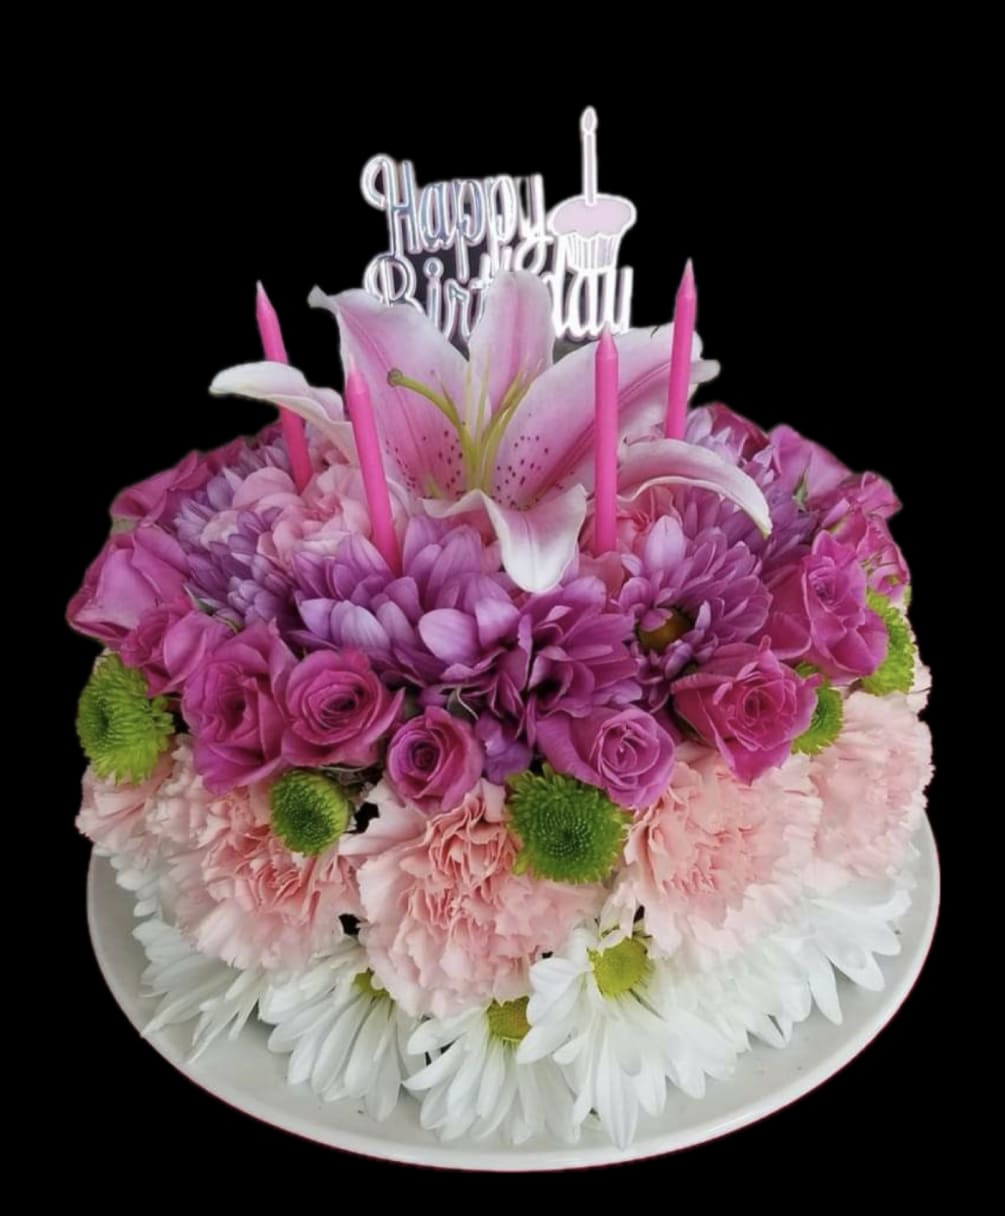 Happy Birthday flowers for special someone top with Lily and mixed flowers